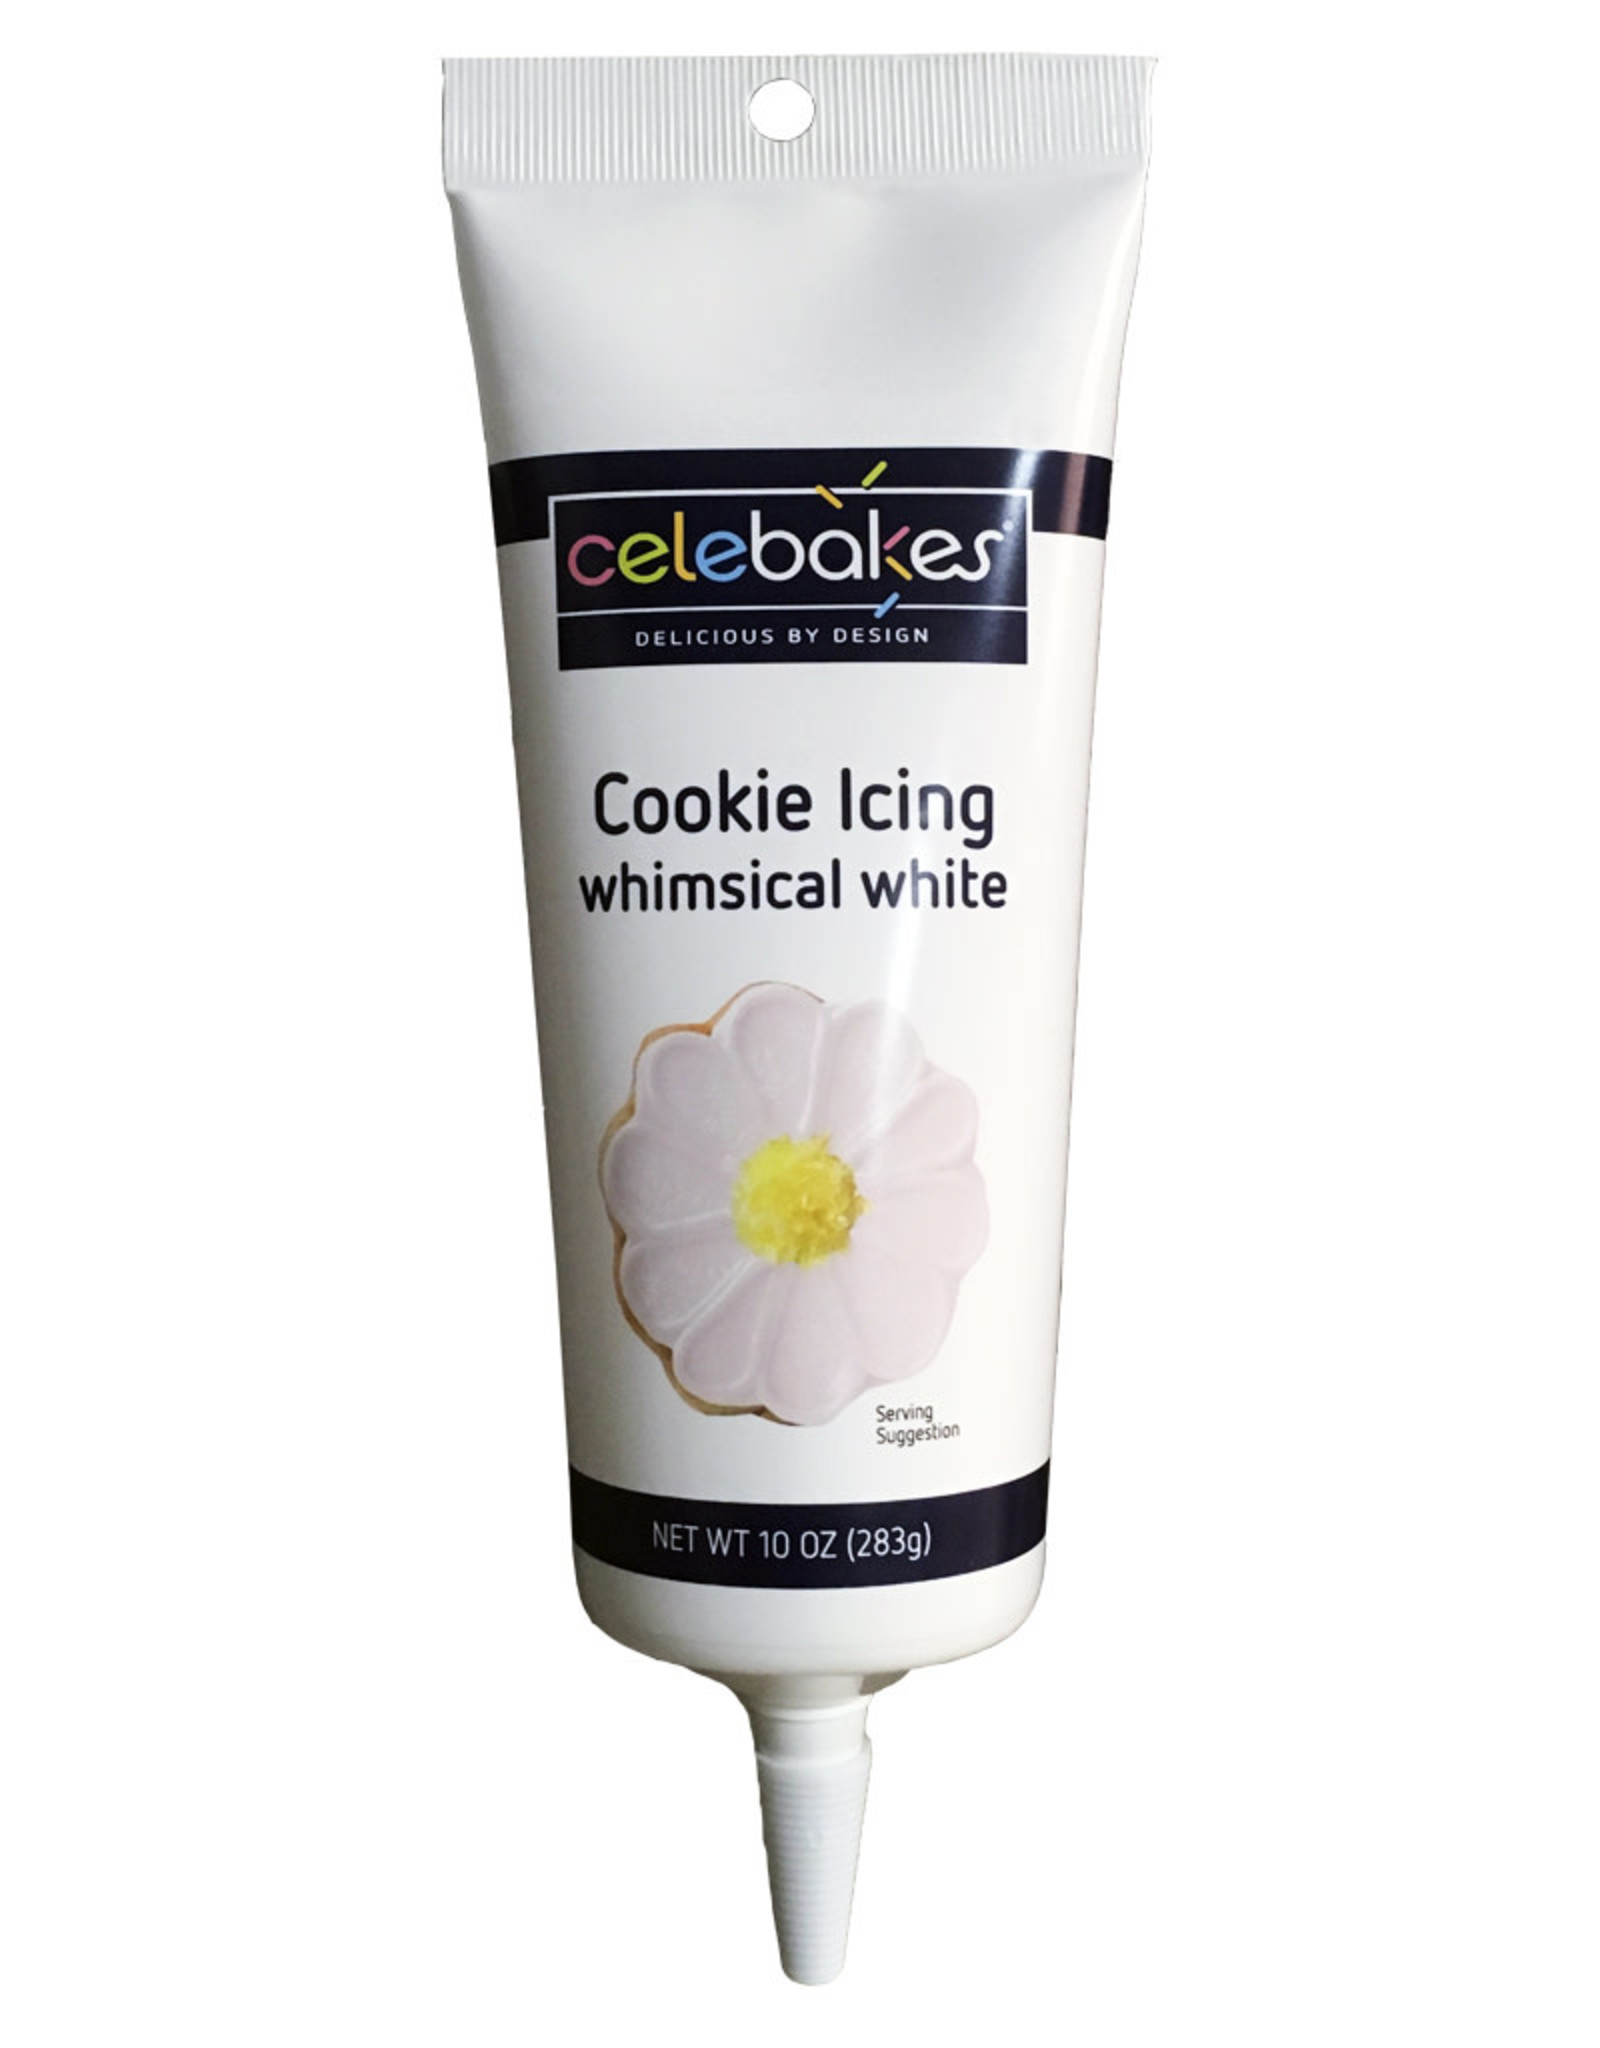 Celebakes Cookie Icing (Whimsical White)